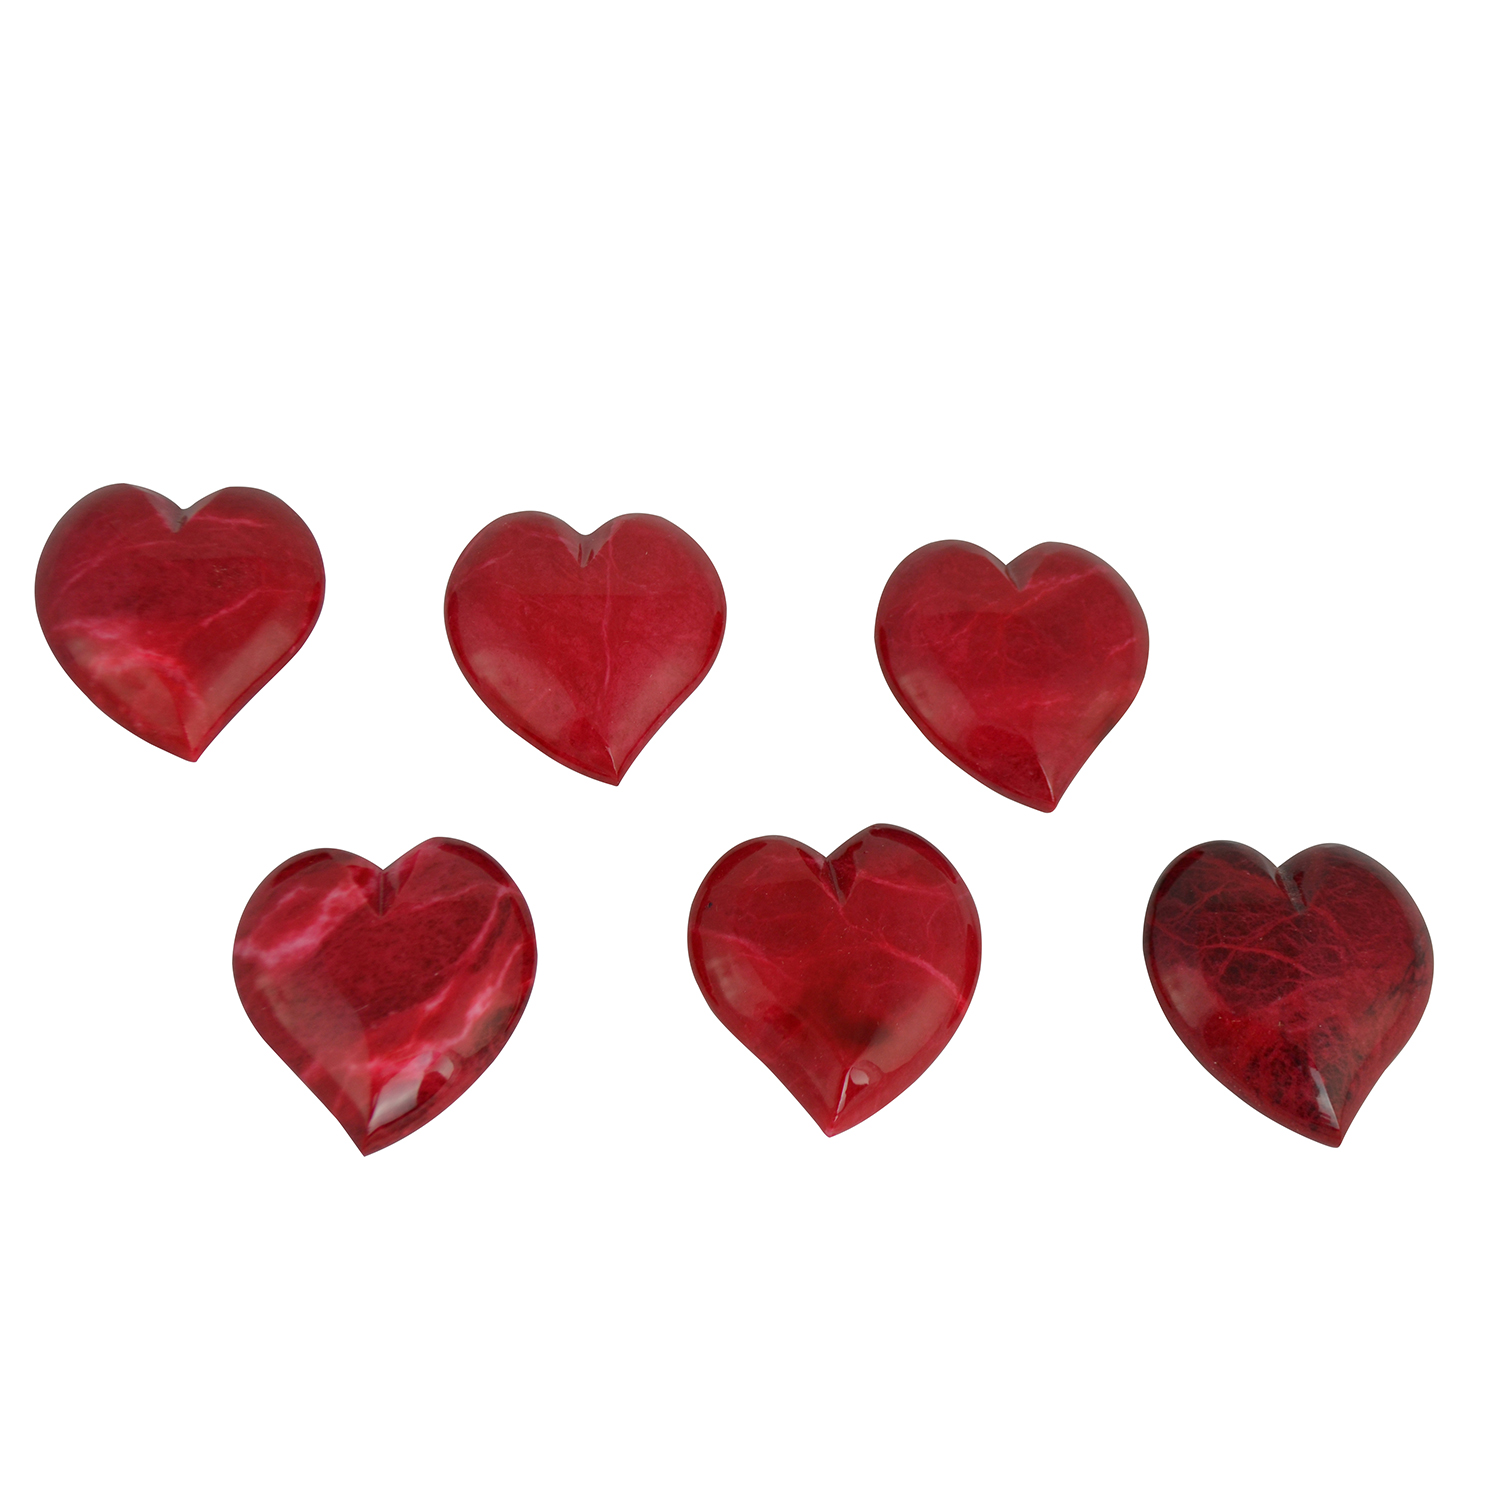 6-PC SET OF 2.5x2.5 RED ALABASTER HEARTS